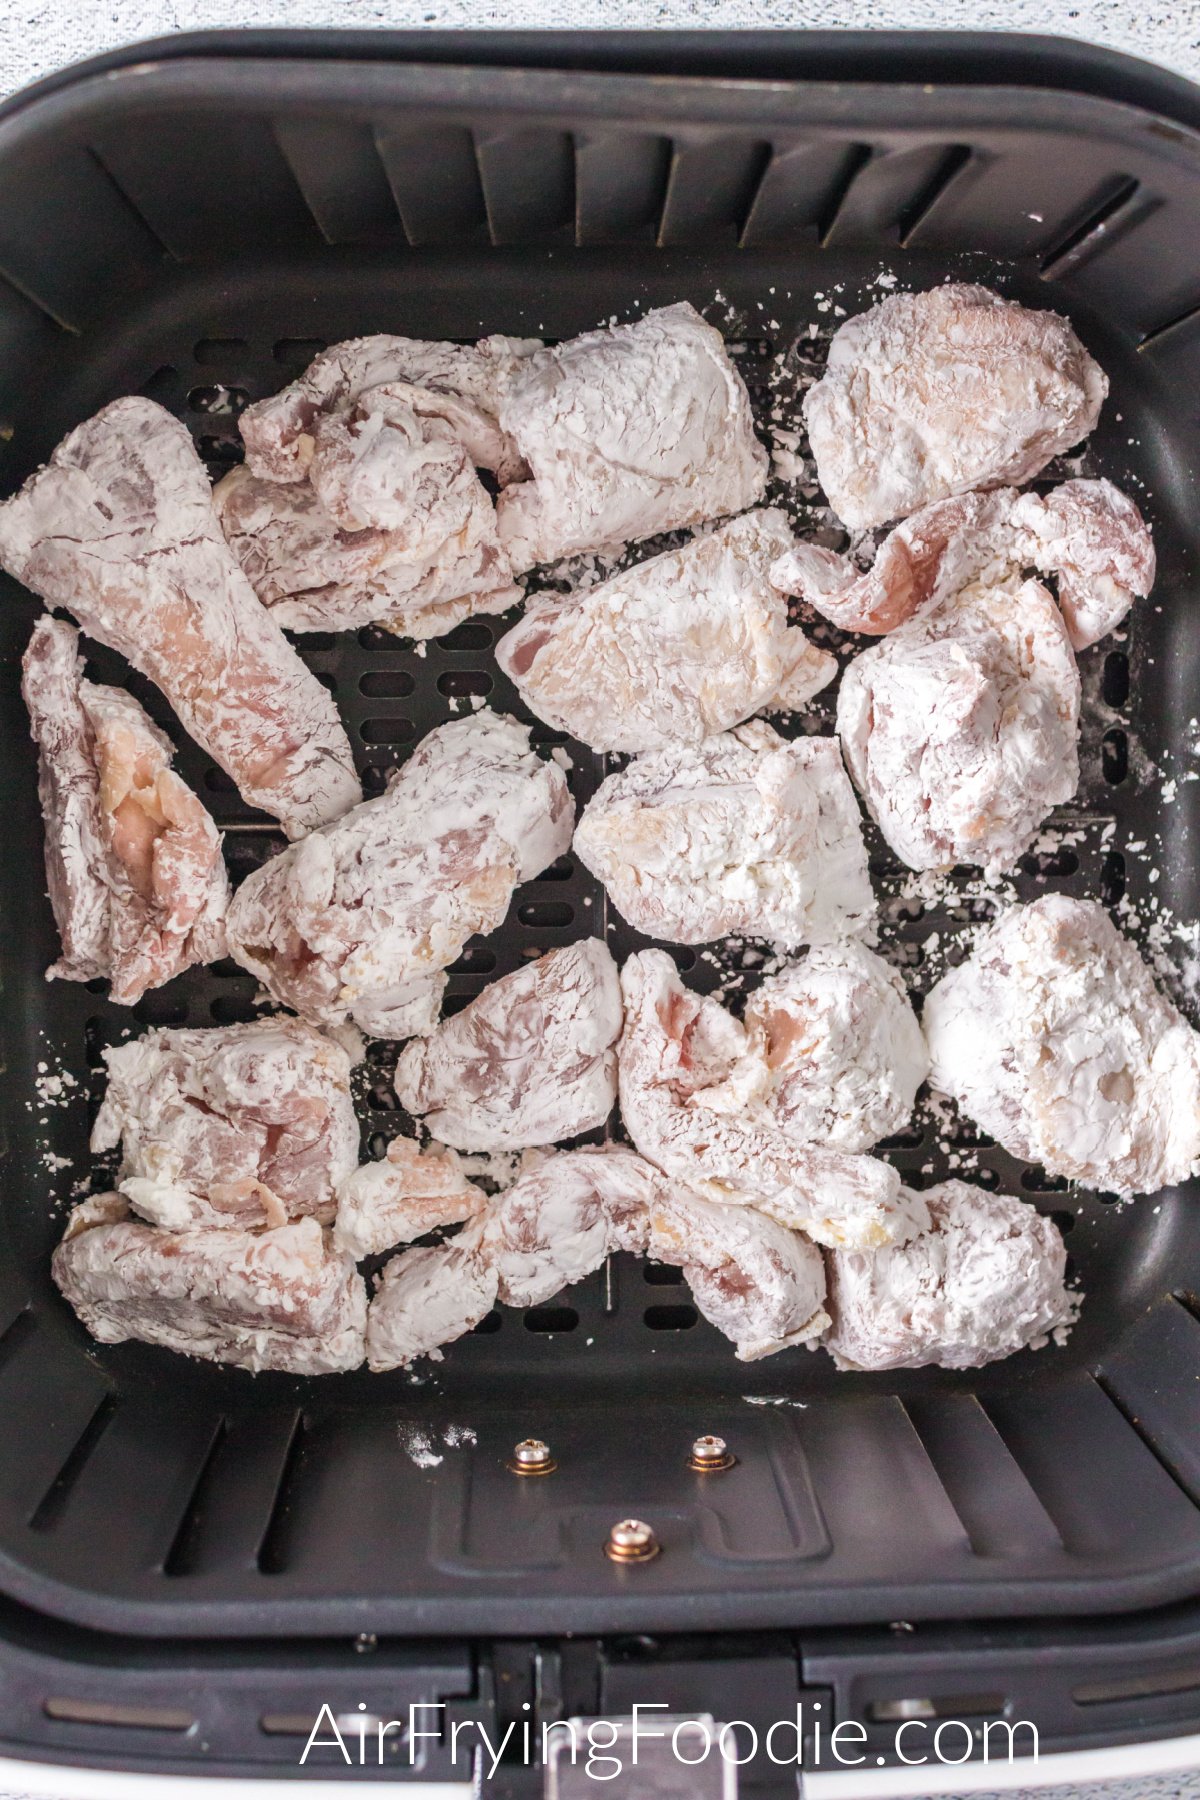 Coated chicken in the basket of the air fryer